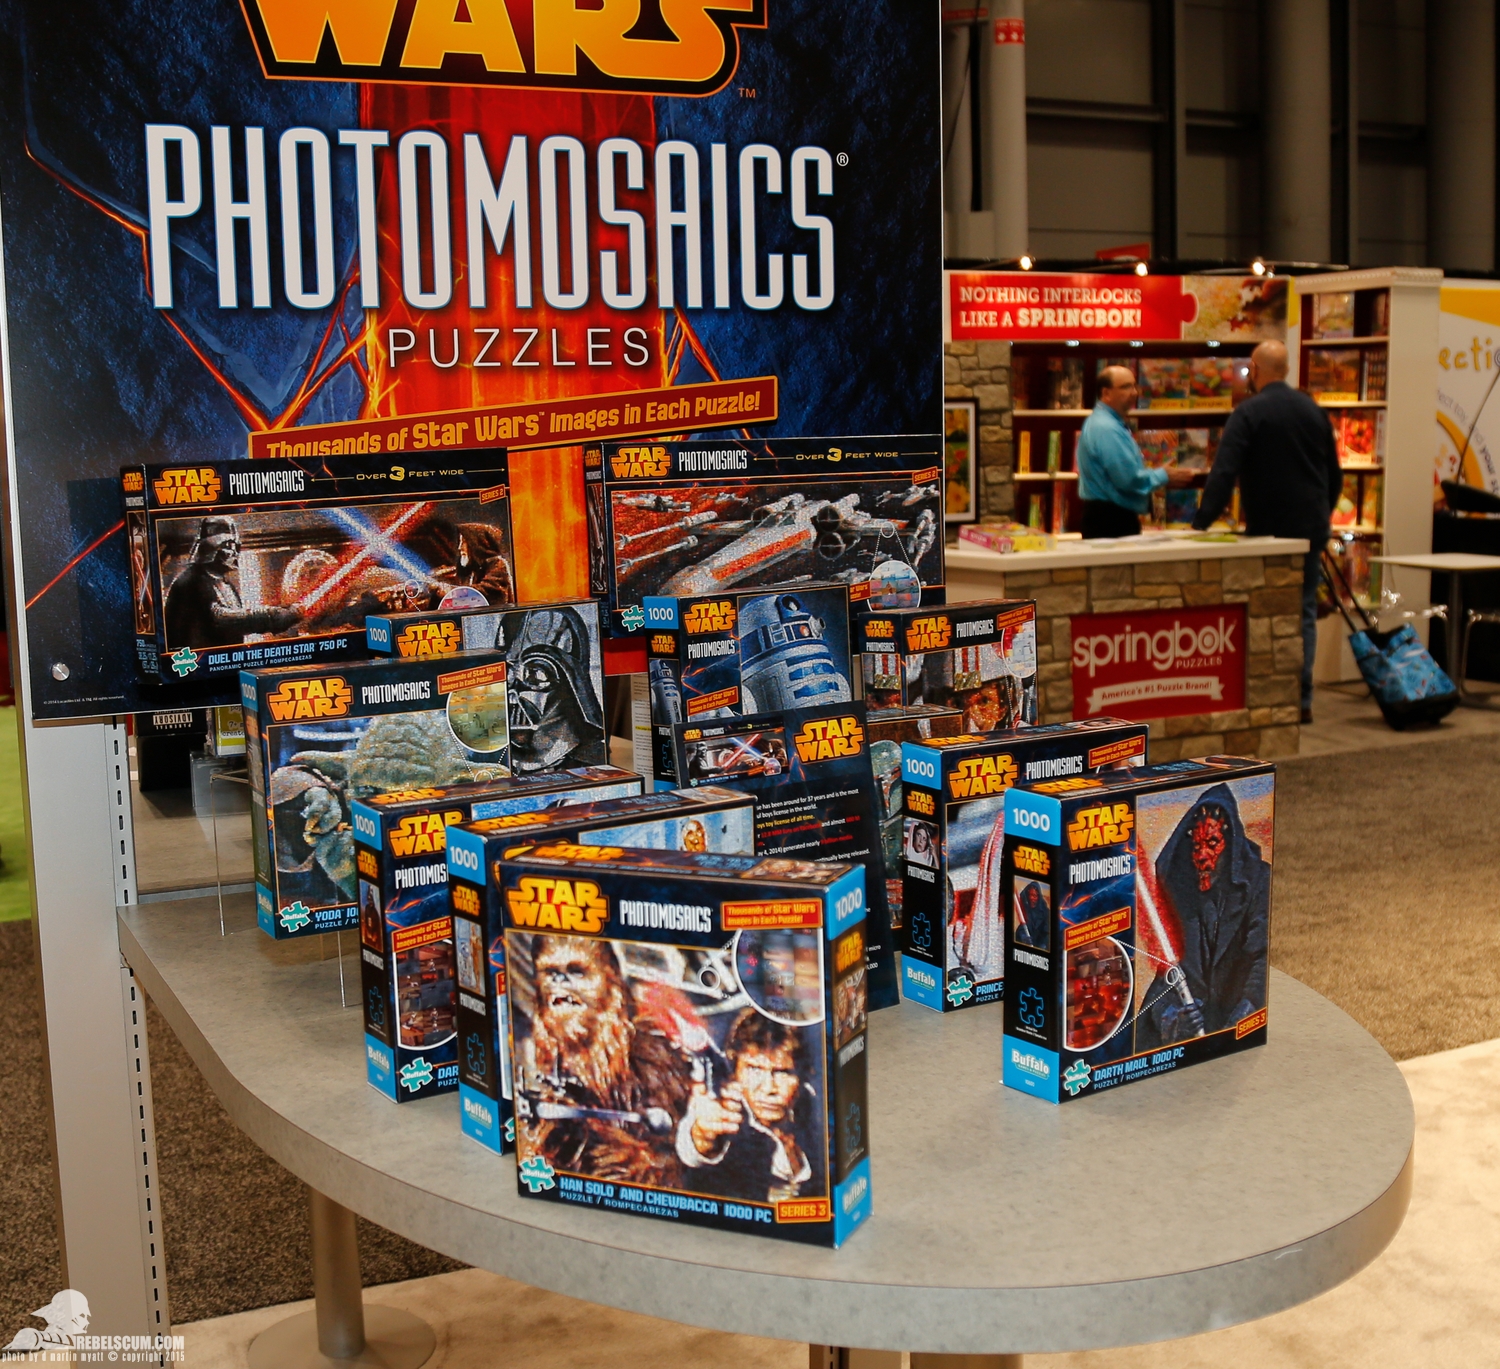 2015-Toy-Fair-Buffalo-Games-and-Puzzles-003.jpg